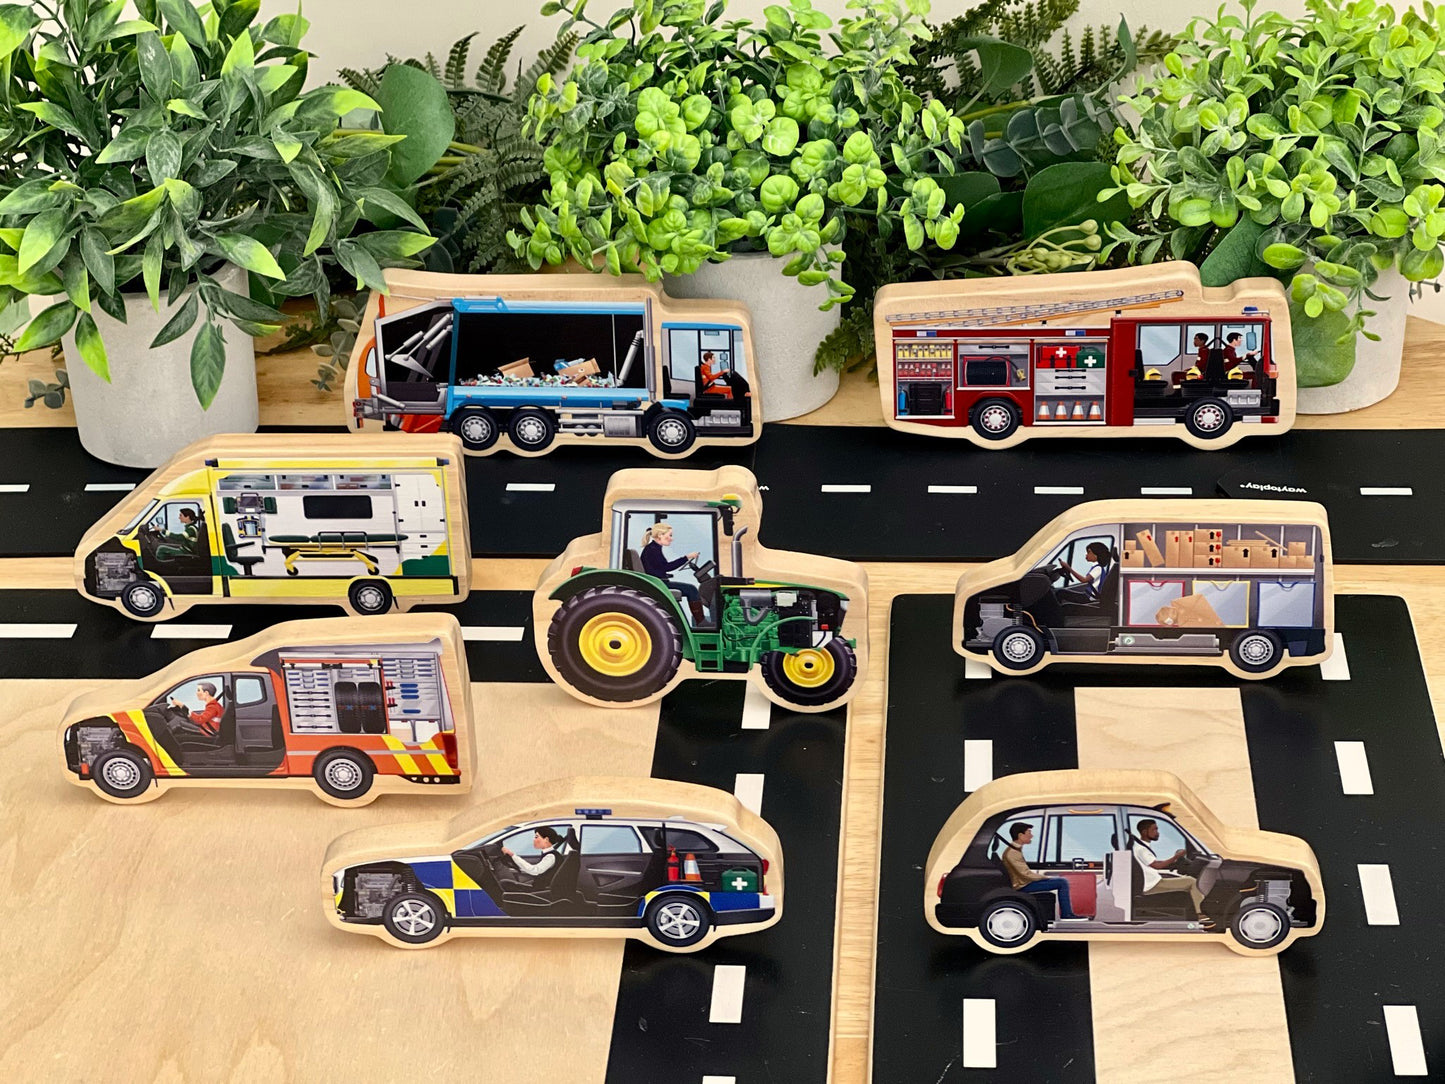 look inside - community play vehicles - NEW - coming MARCH